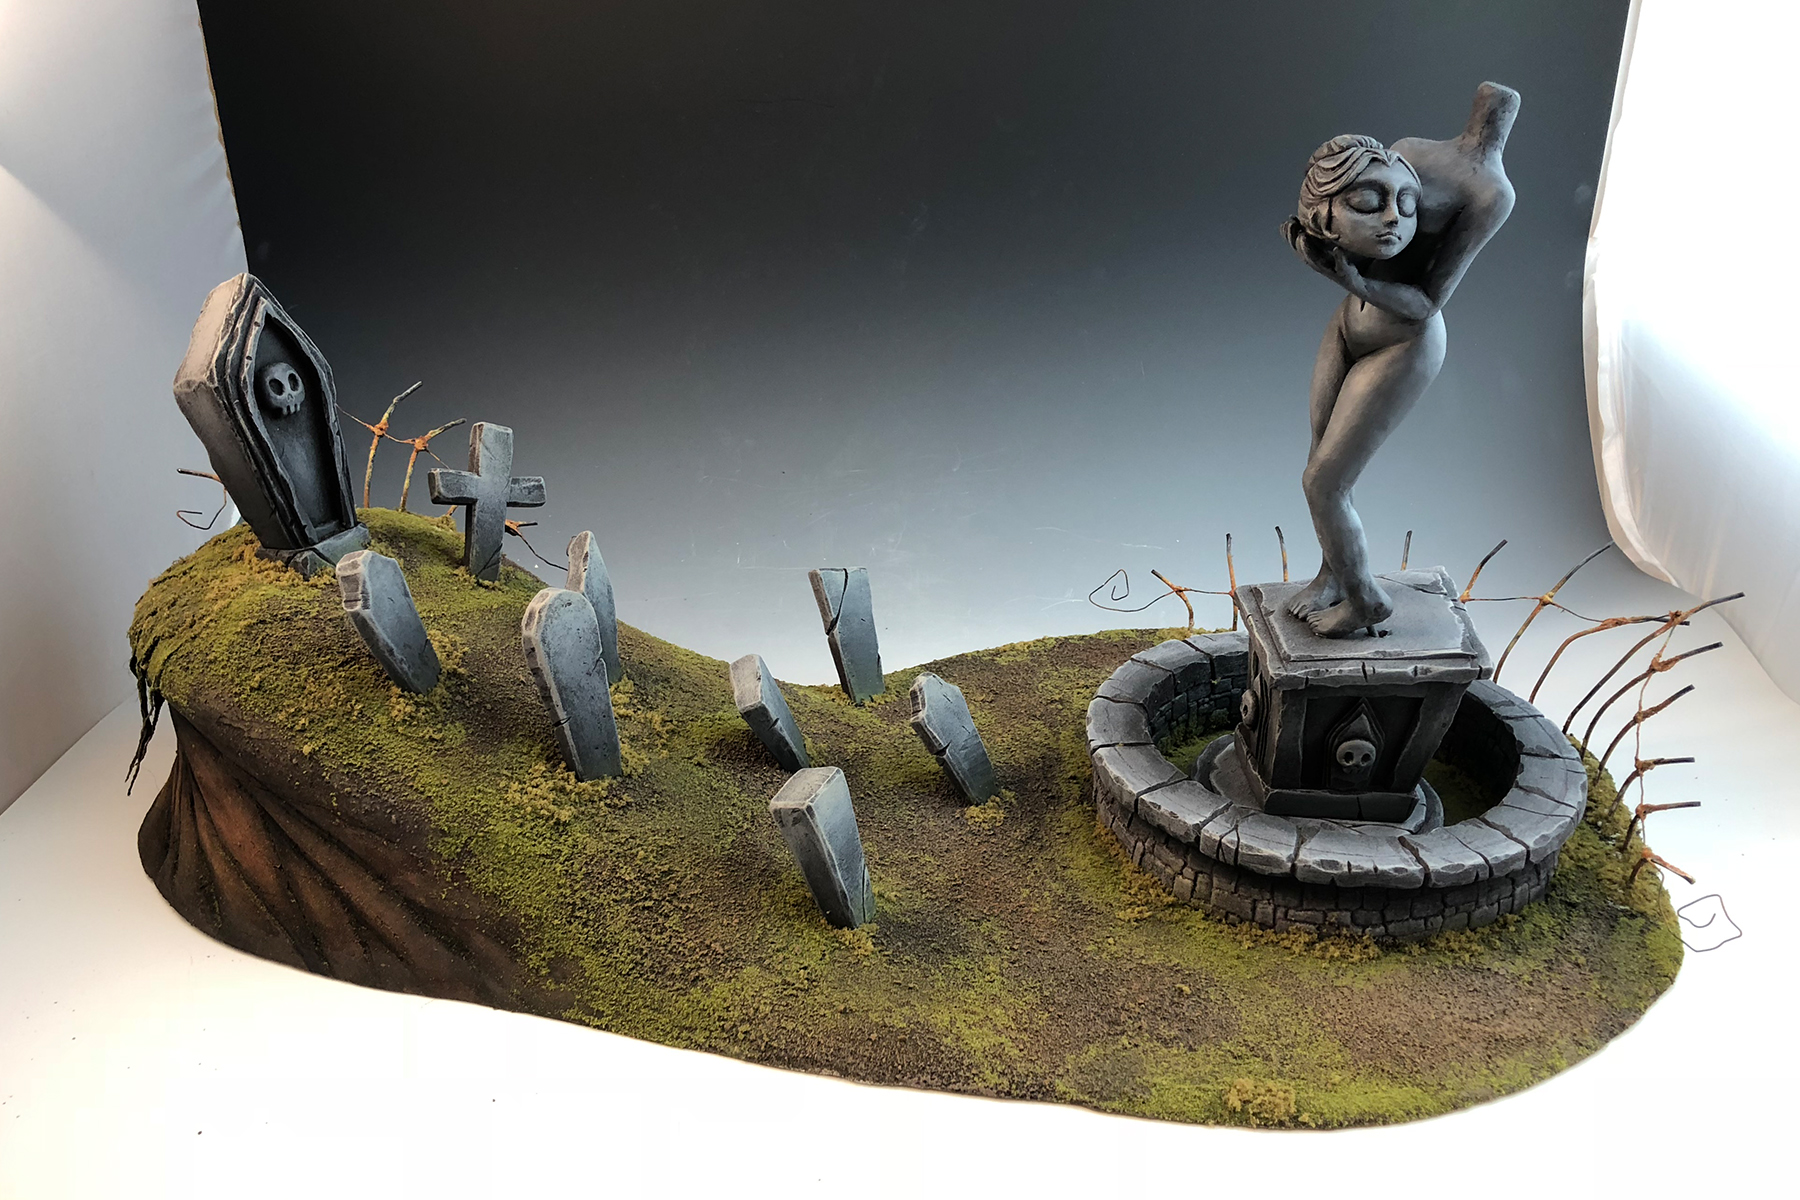 An ornate graveyard set designed and fabricated by student Abigail Snider.